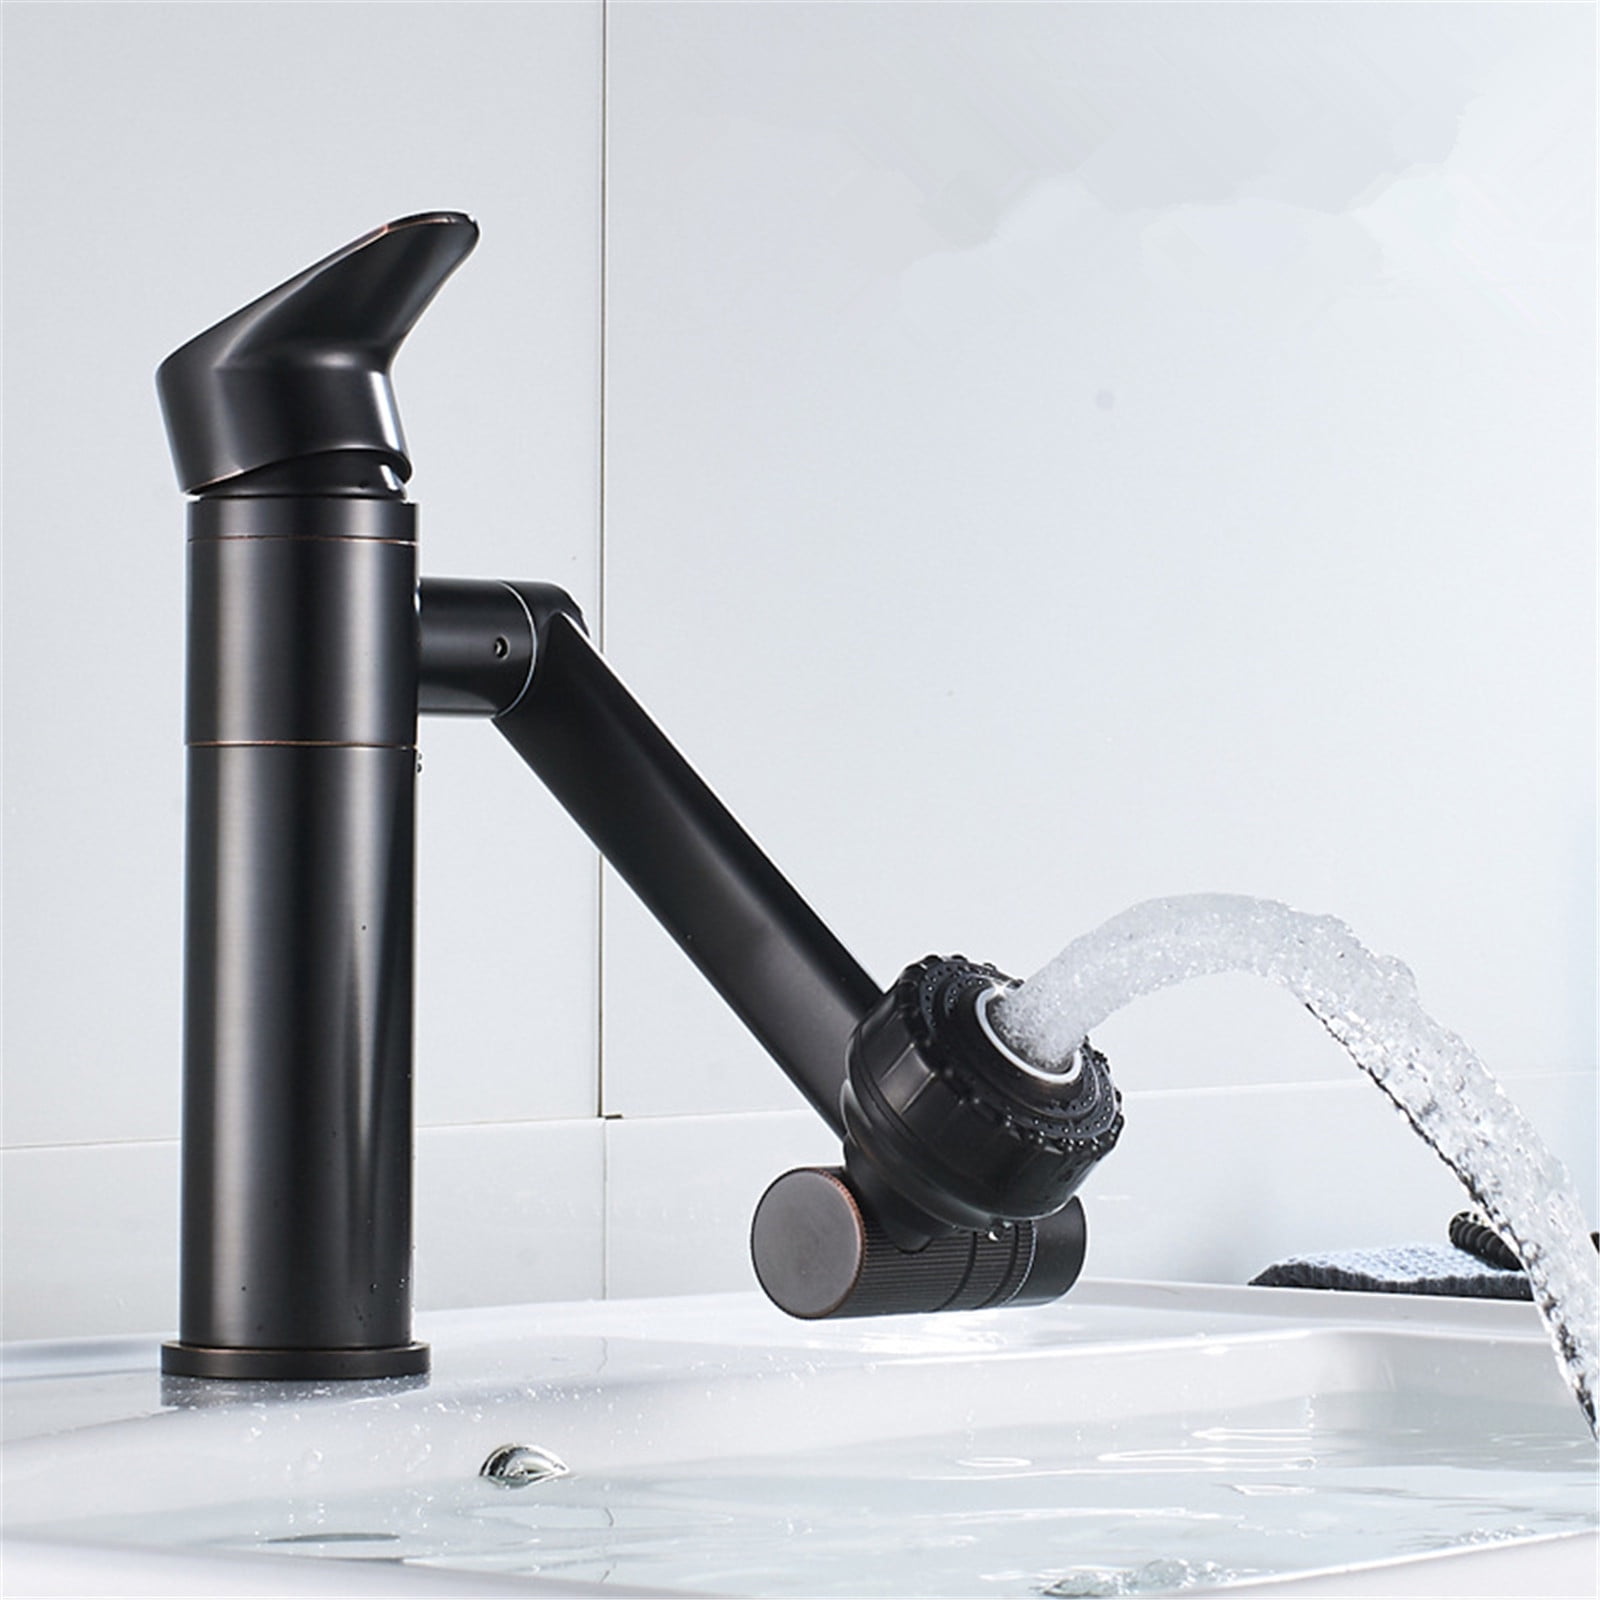 ZS ZHISHANG Modern 360 Degree Rotating Single Hole Faucet Multifunctional Hot and Cold Water Sprayer Brushed Nickel,Basin Faucet for Bathroom Sink 